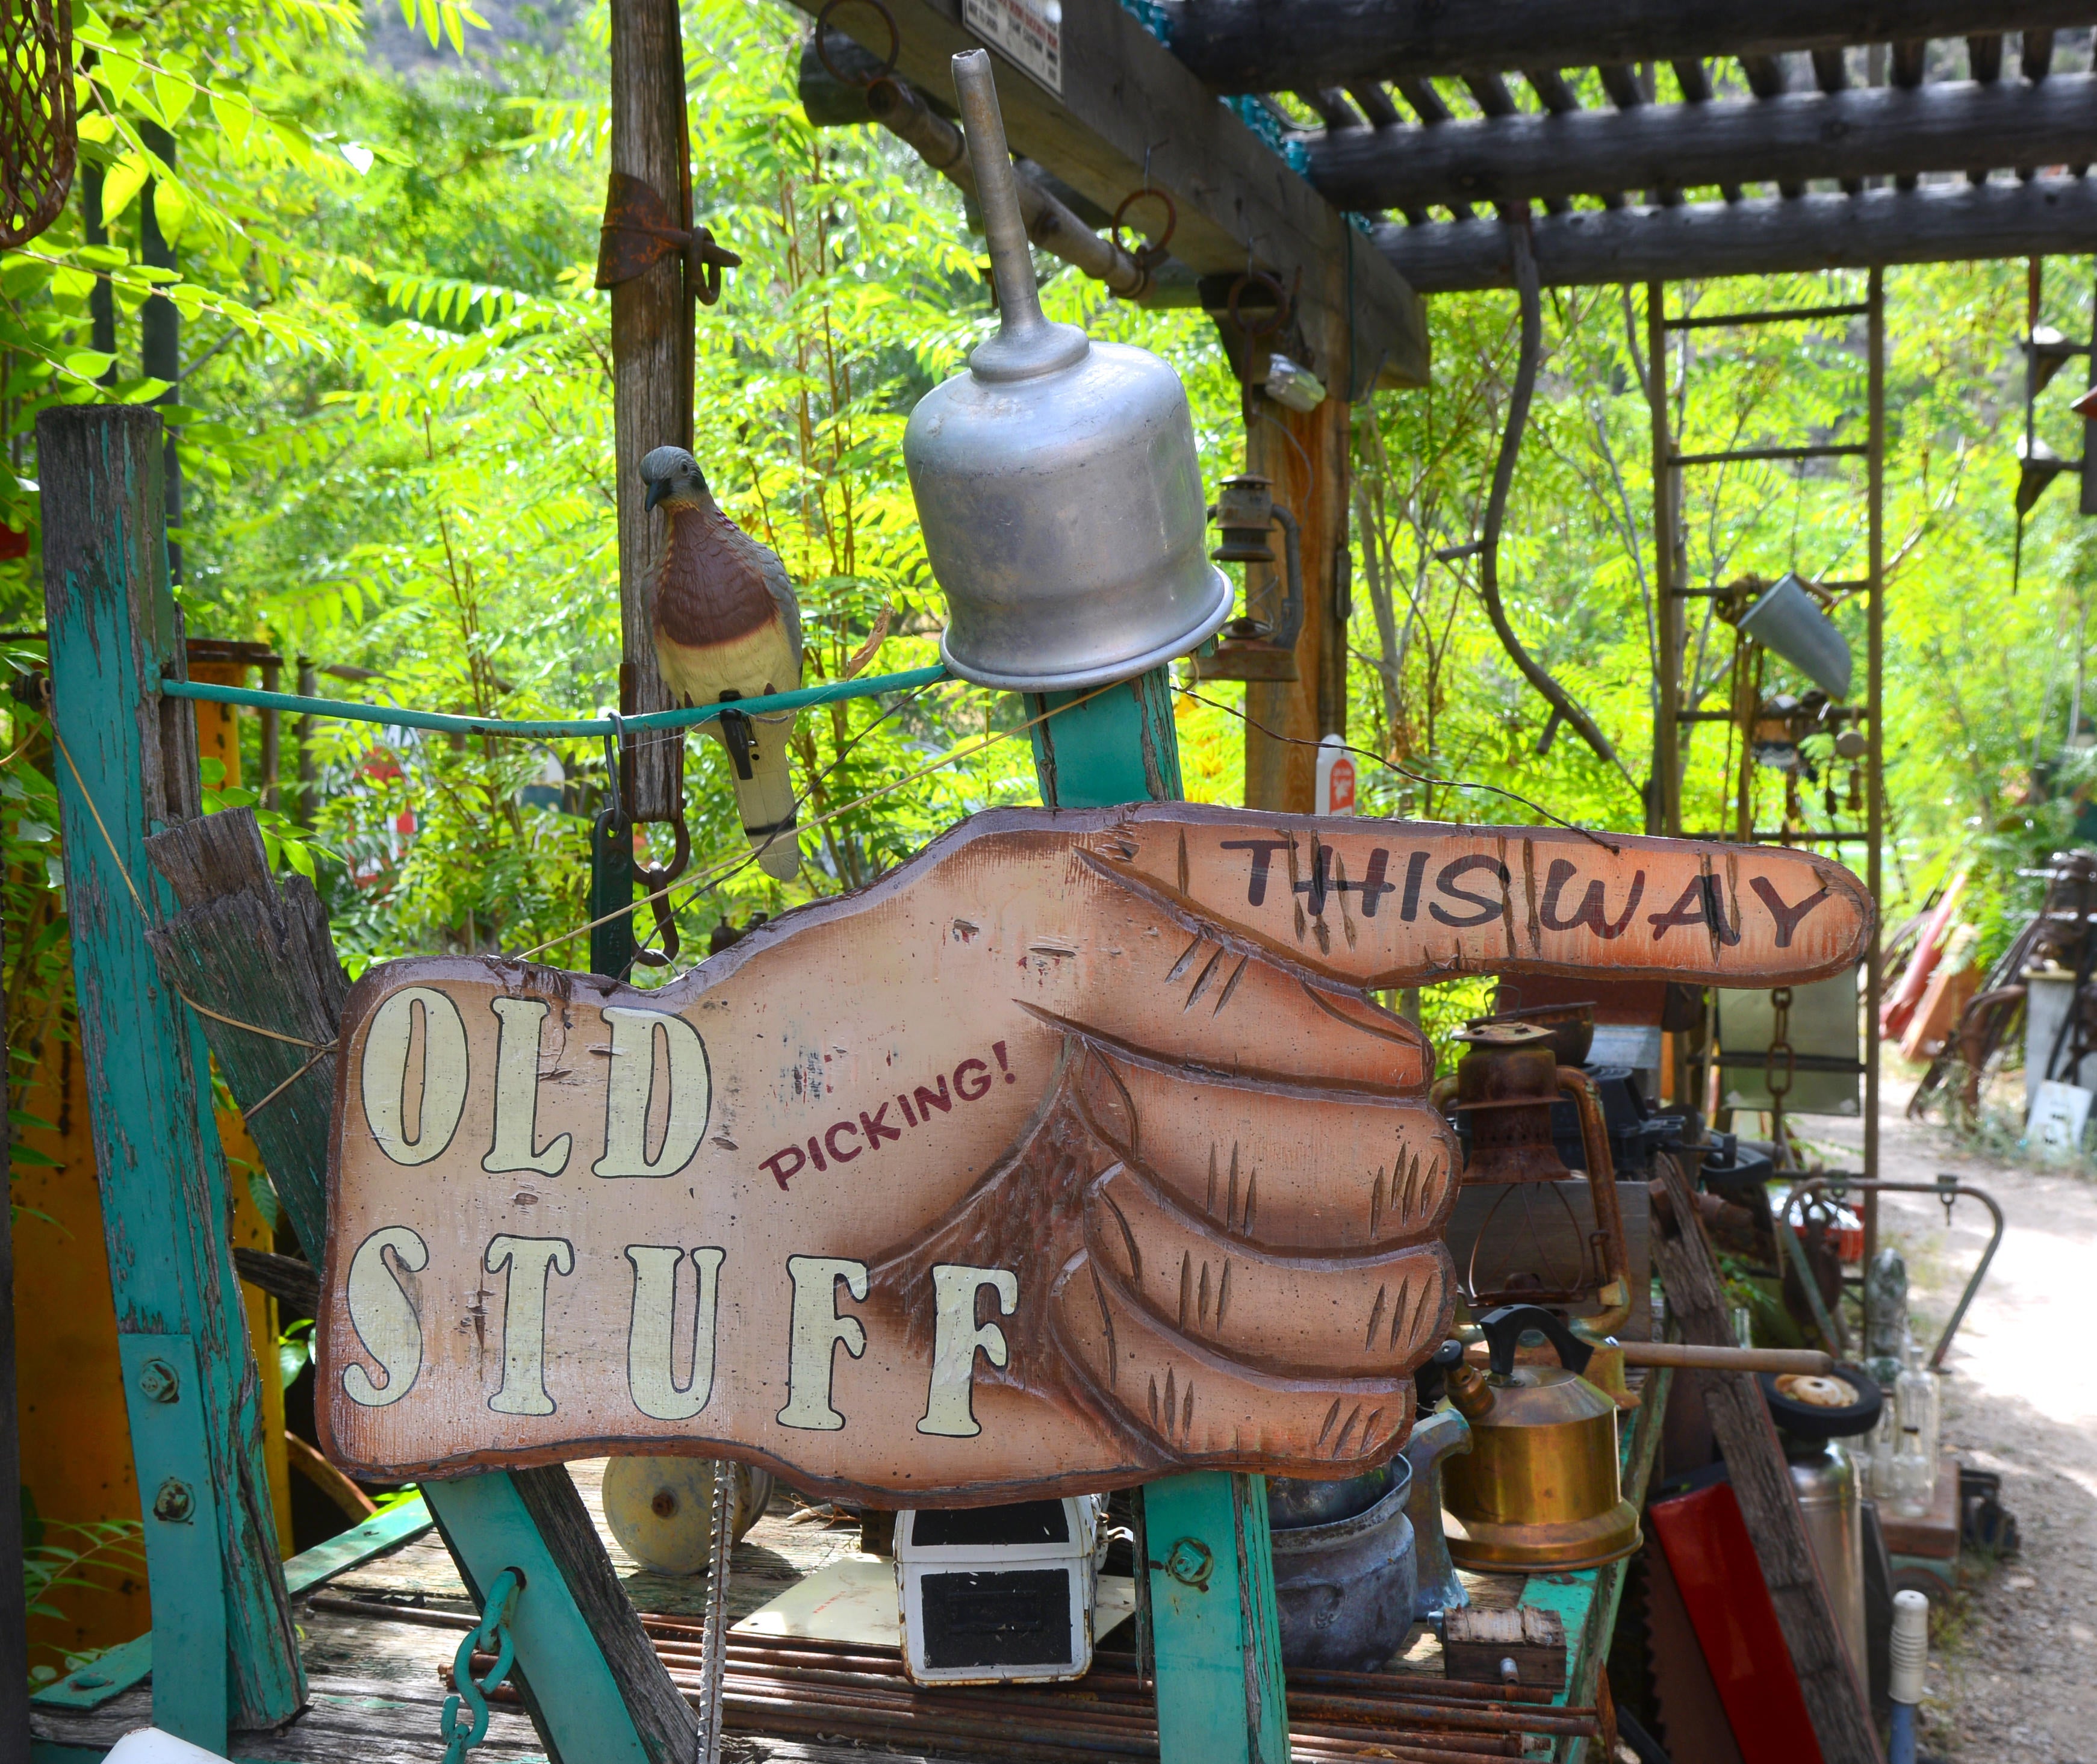 Hand sign pointing the way to antiques and secondhand items (Alamy/PA)